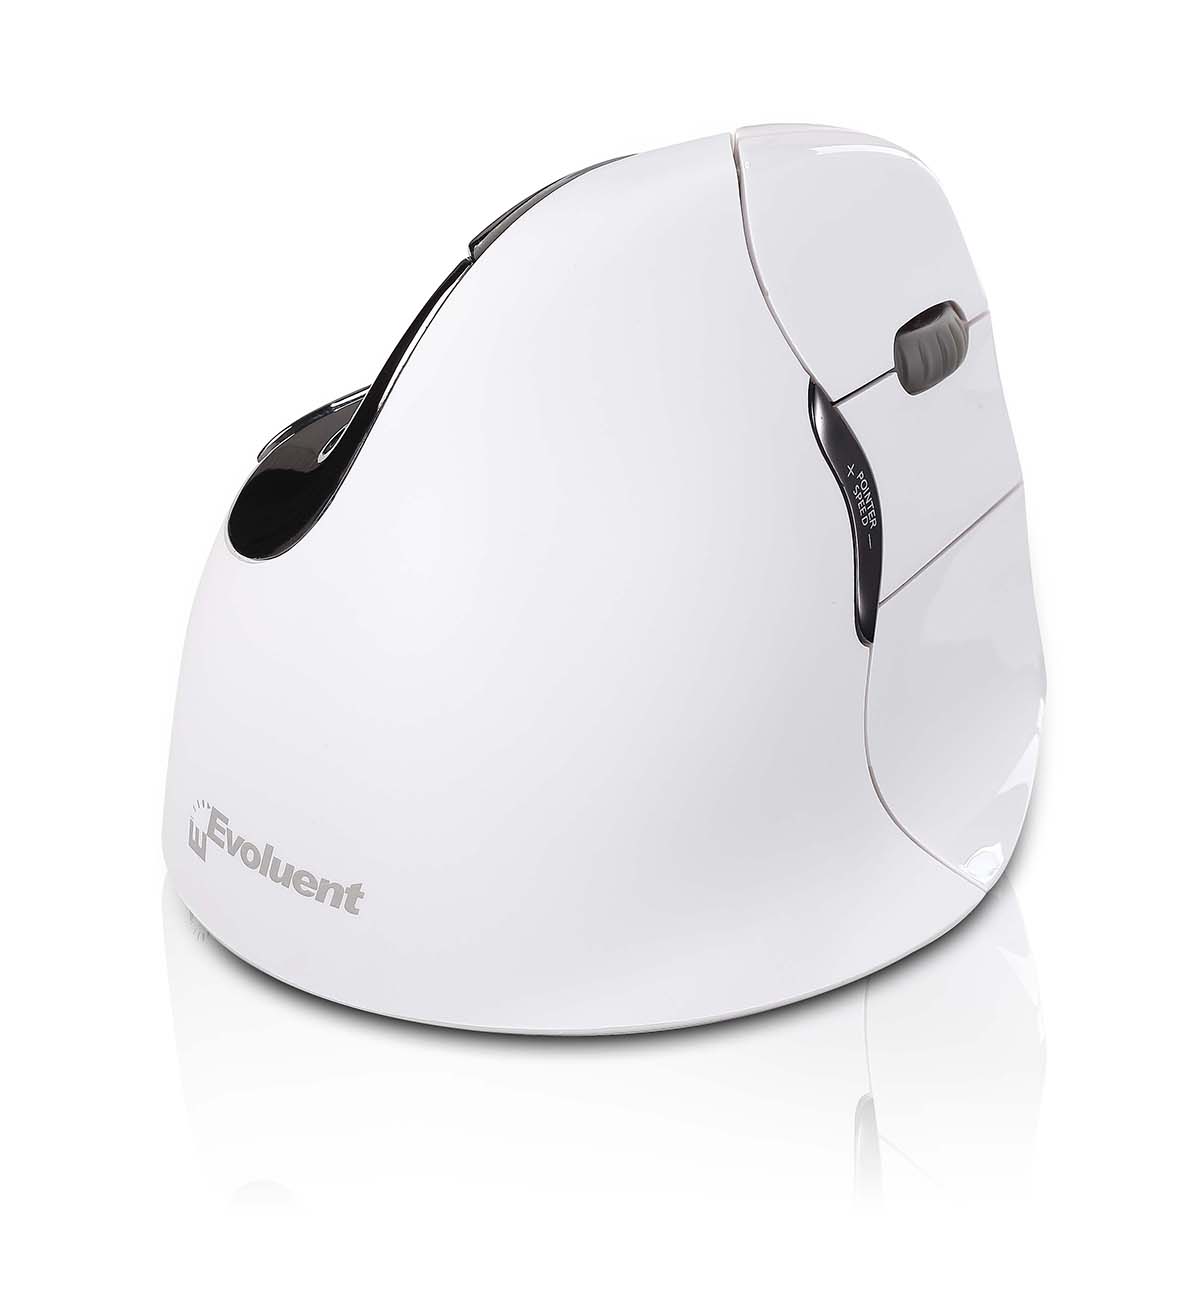 VMOUS4RBTHY EVOLUENT An Evoluent product. RIGHT HANDED Evoluent VerticalMouse 4 Bluetooth in white - Windows OS variant. Patented vertical mouse that supports your hand in a relaxed handshake position- and eliminates the arm twisting required by ordinary mice. The 4 is the la